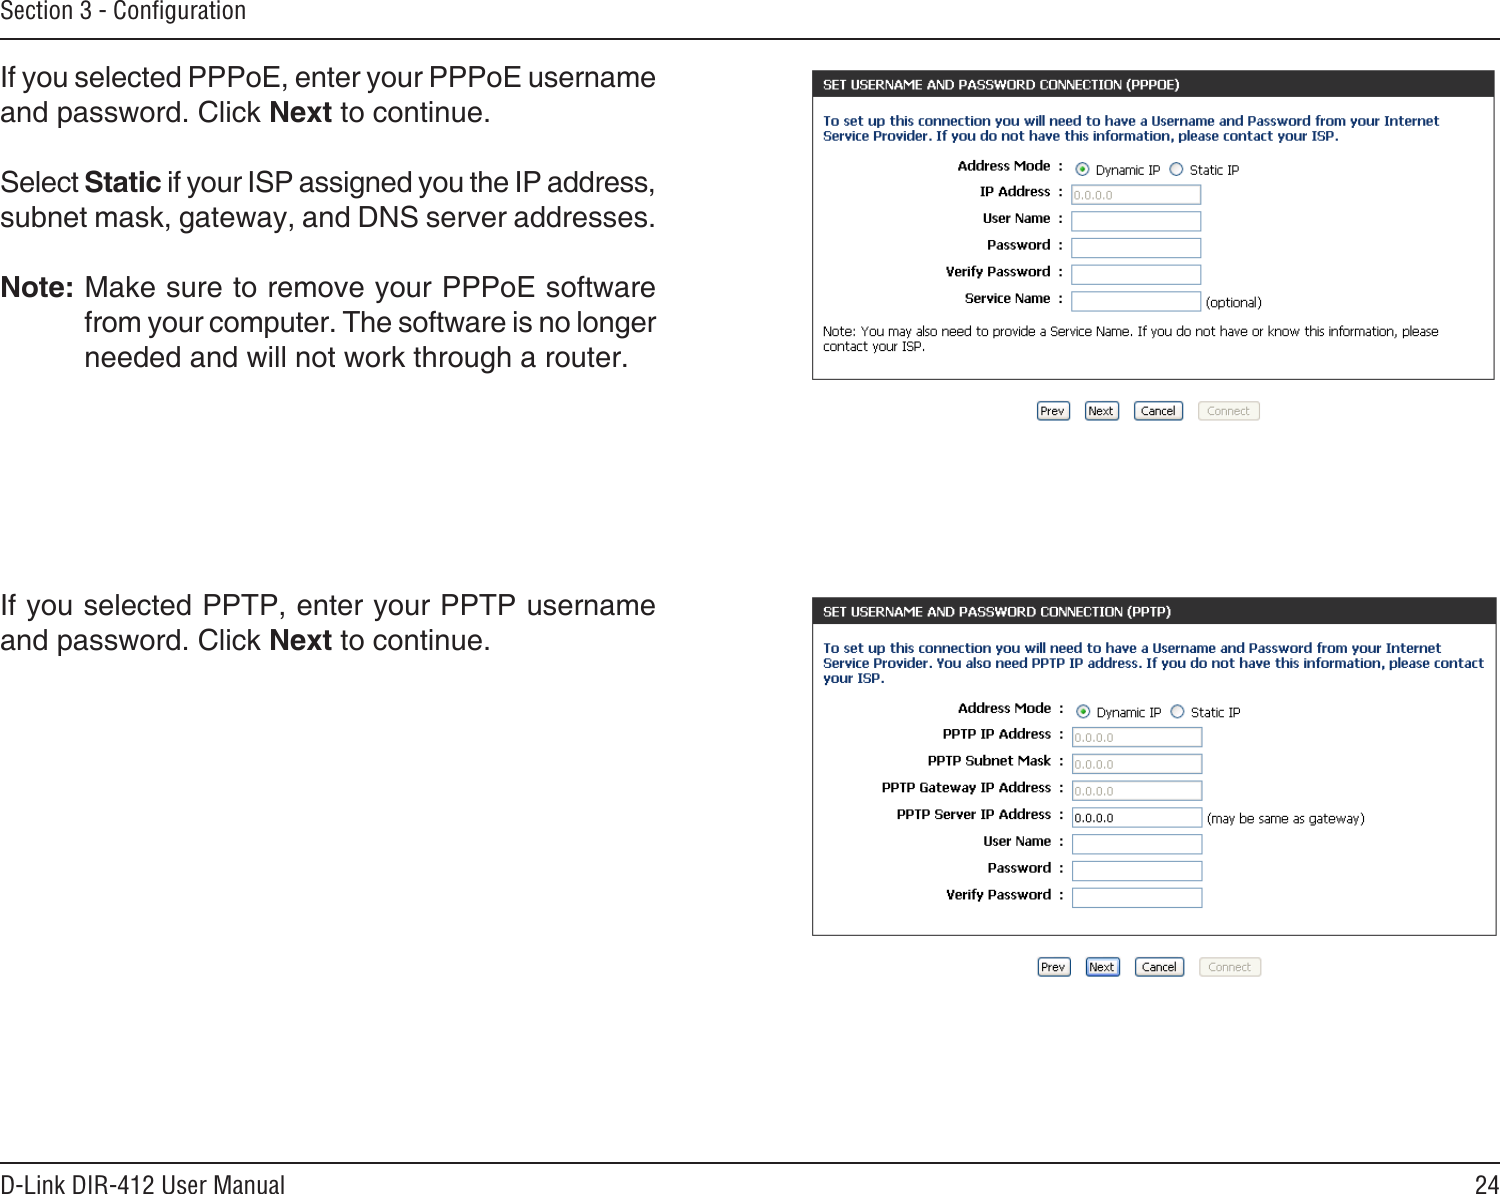 24D-Link DIR-412 User ManualSection 3 - ConﬁgurationIf you selected PPTP, enter your PPTP username and password. Click Next to continue.If you selected PPPoE, enter your PPPoE username and password. Click Next to continue.Select Static if your ISP assigned you the IP address, subnet mask, gateway, and DNS server addresses.Note: Make sure to remove your PPPoE software from your computer. The software is no longer needed and will not work through a router.